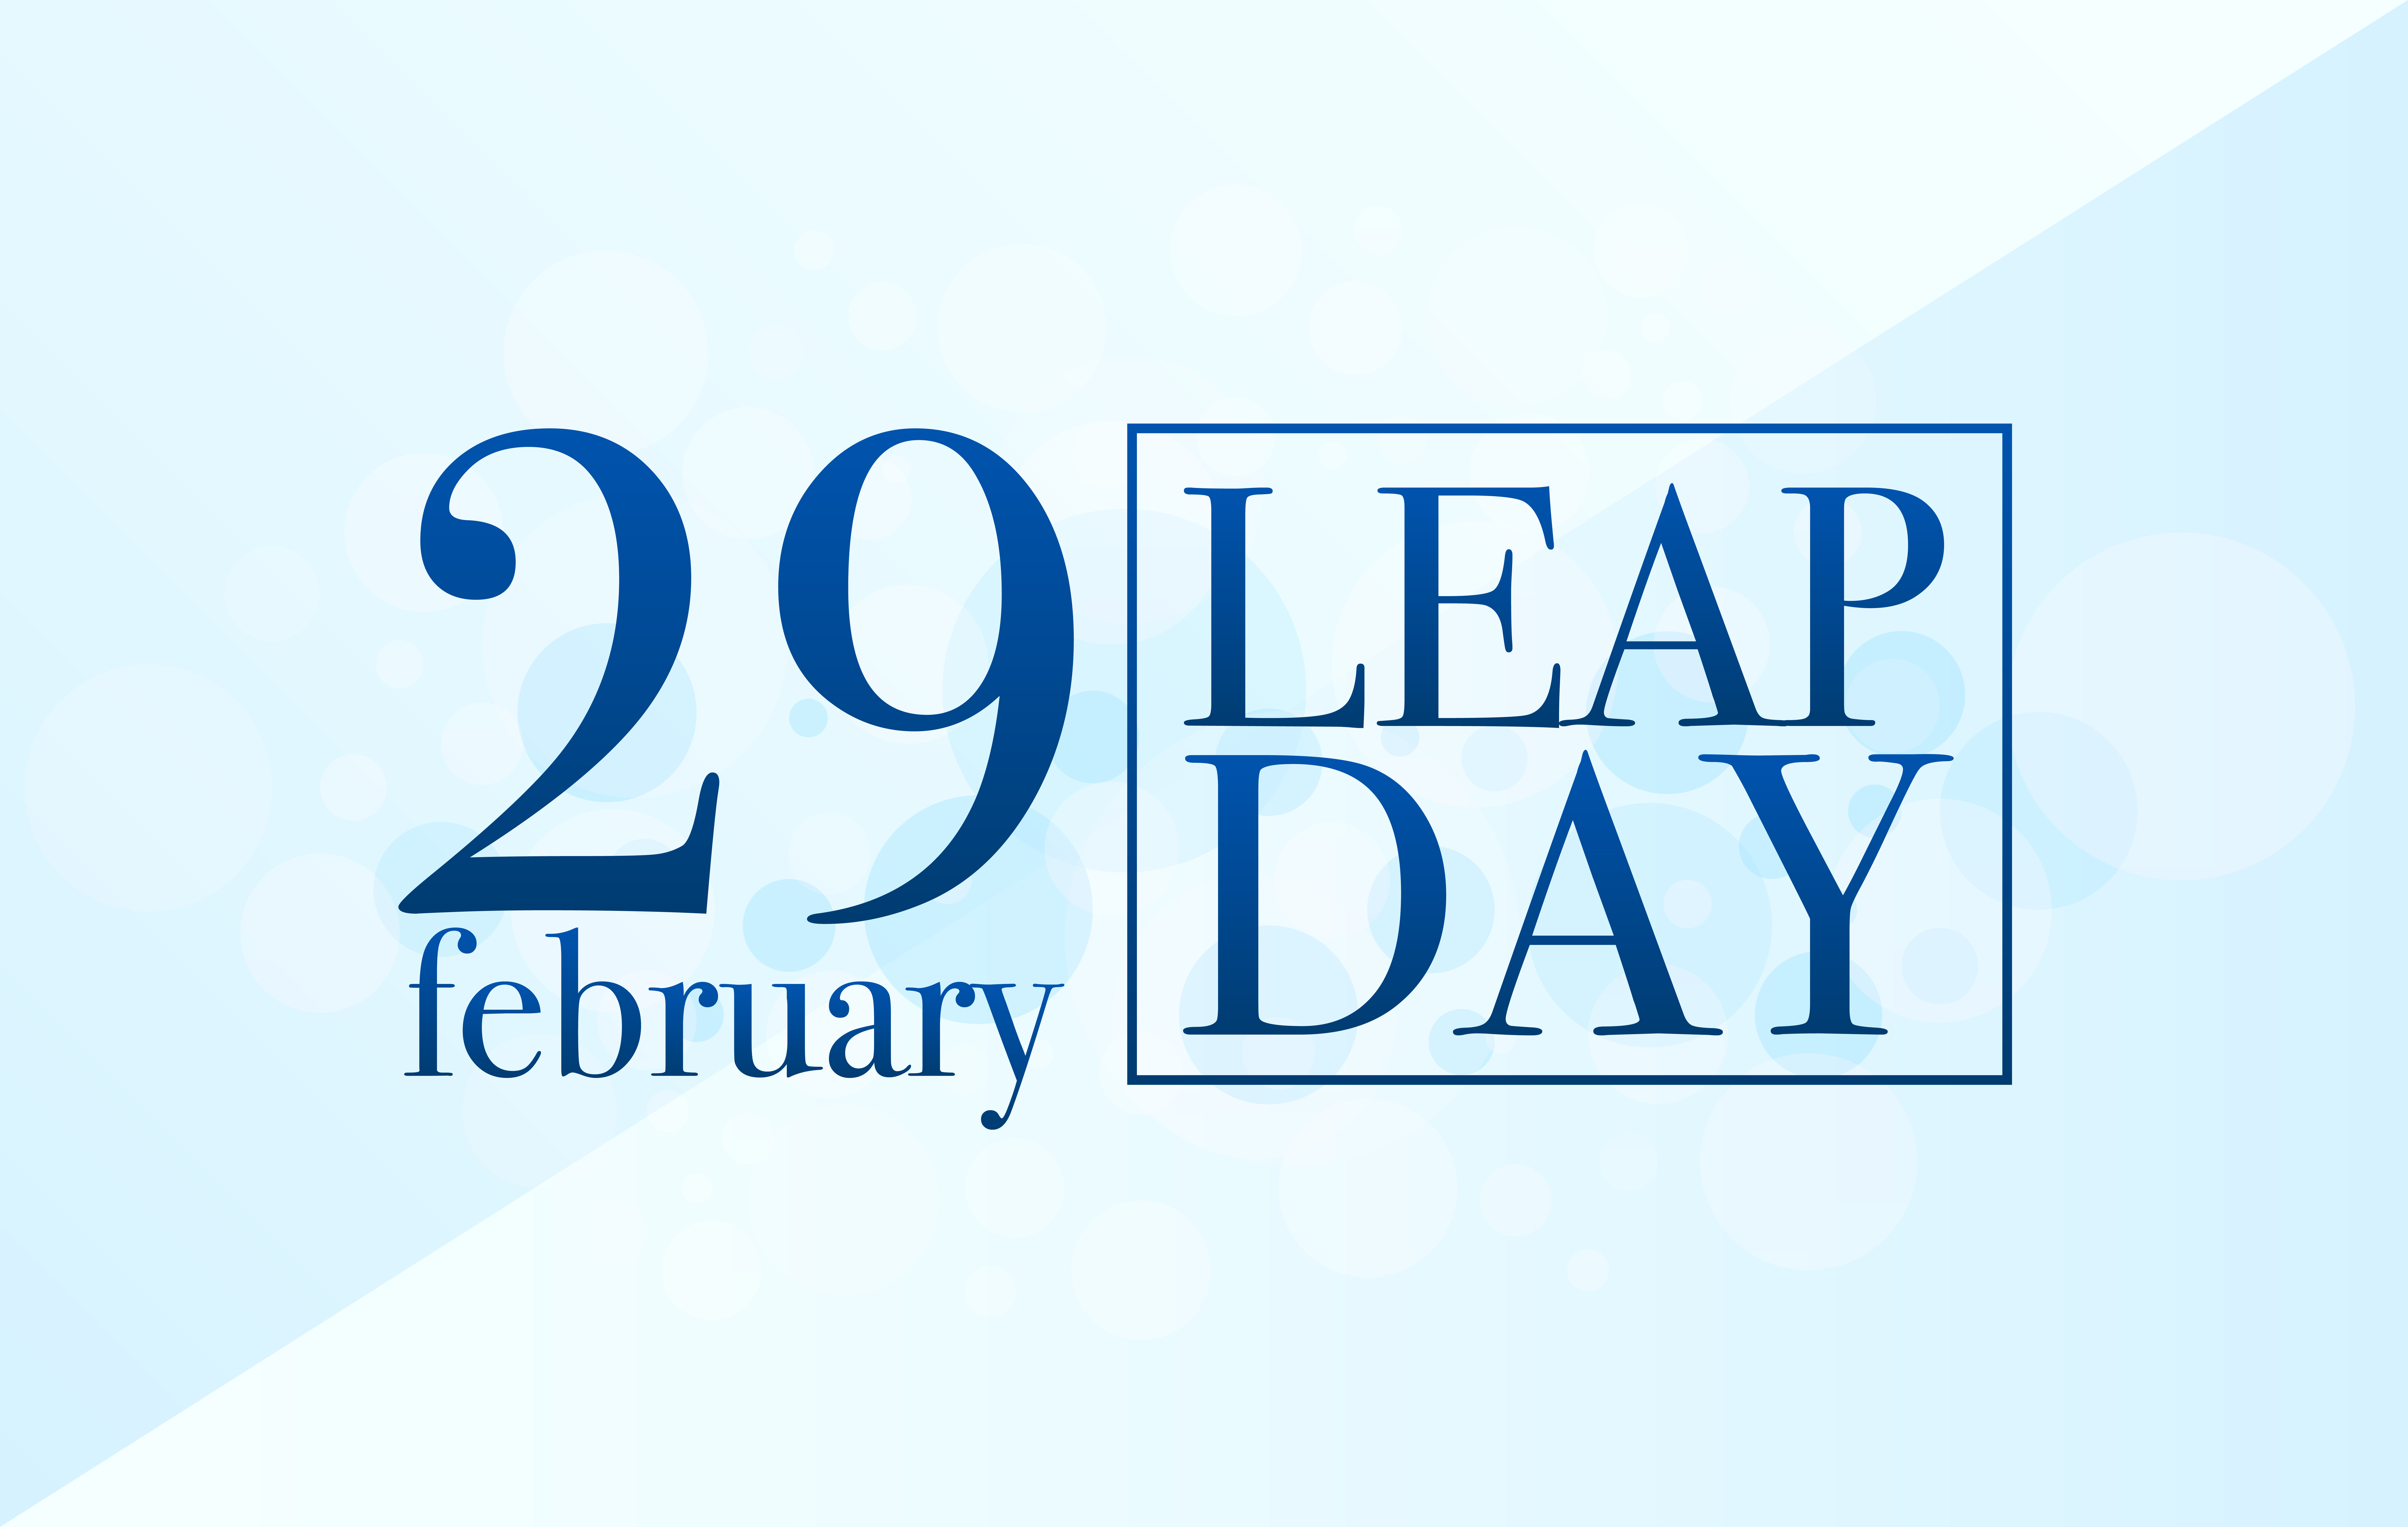 download the last version for iphoneSuper Leap Day